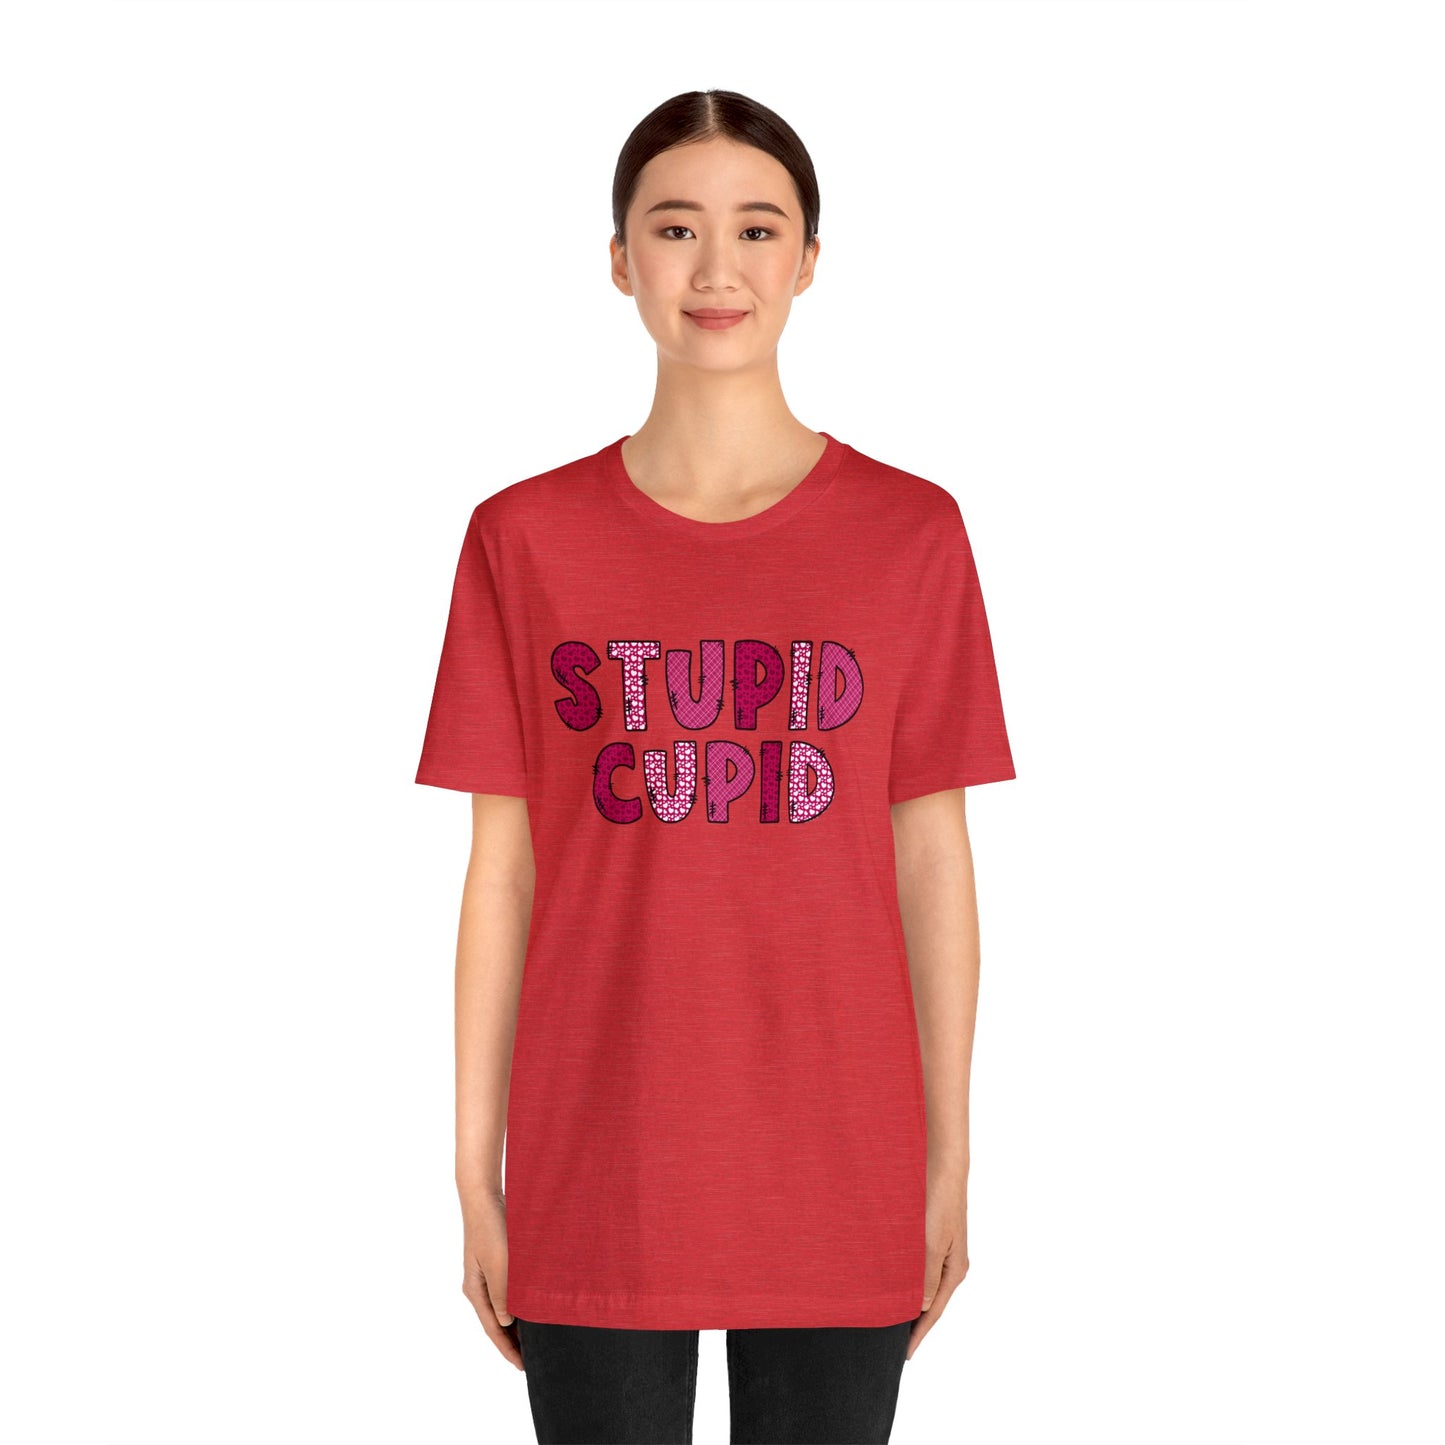 Stupid Cupid T-shirt, Valentine's Day Tee, Unisex Bella and Canvas Shirt